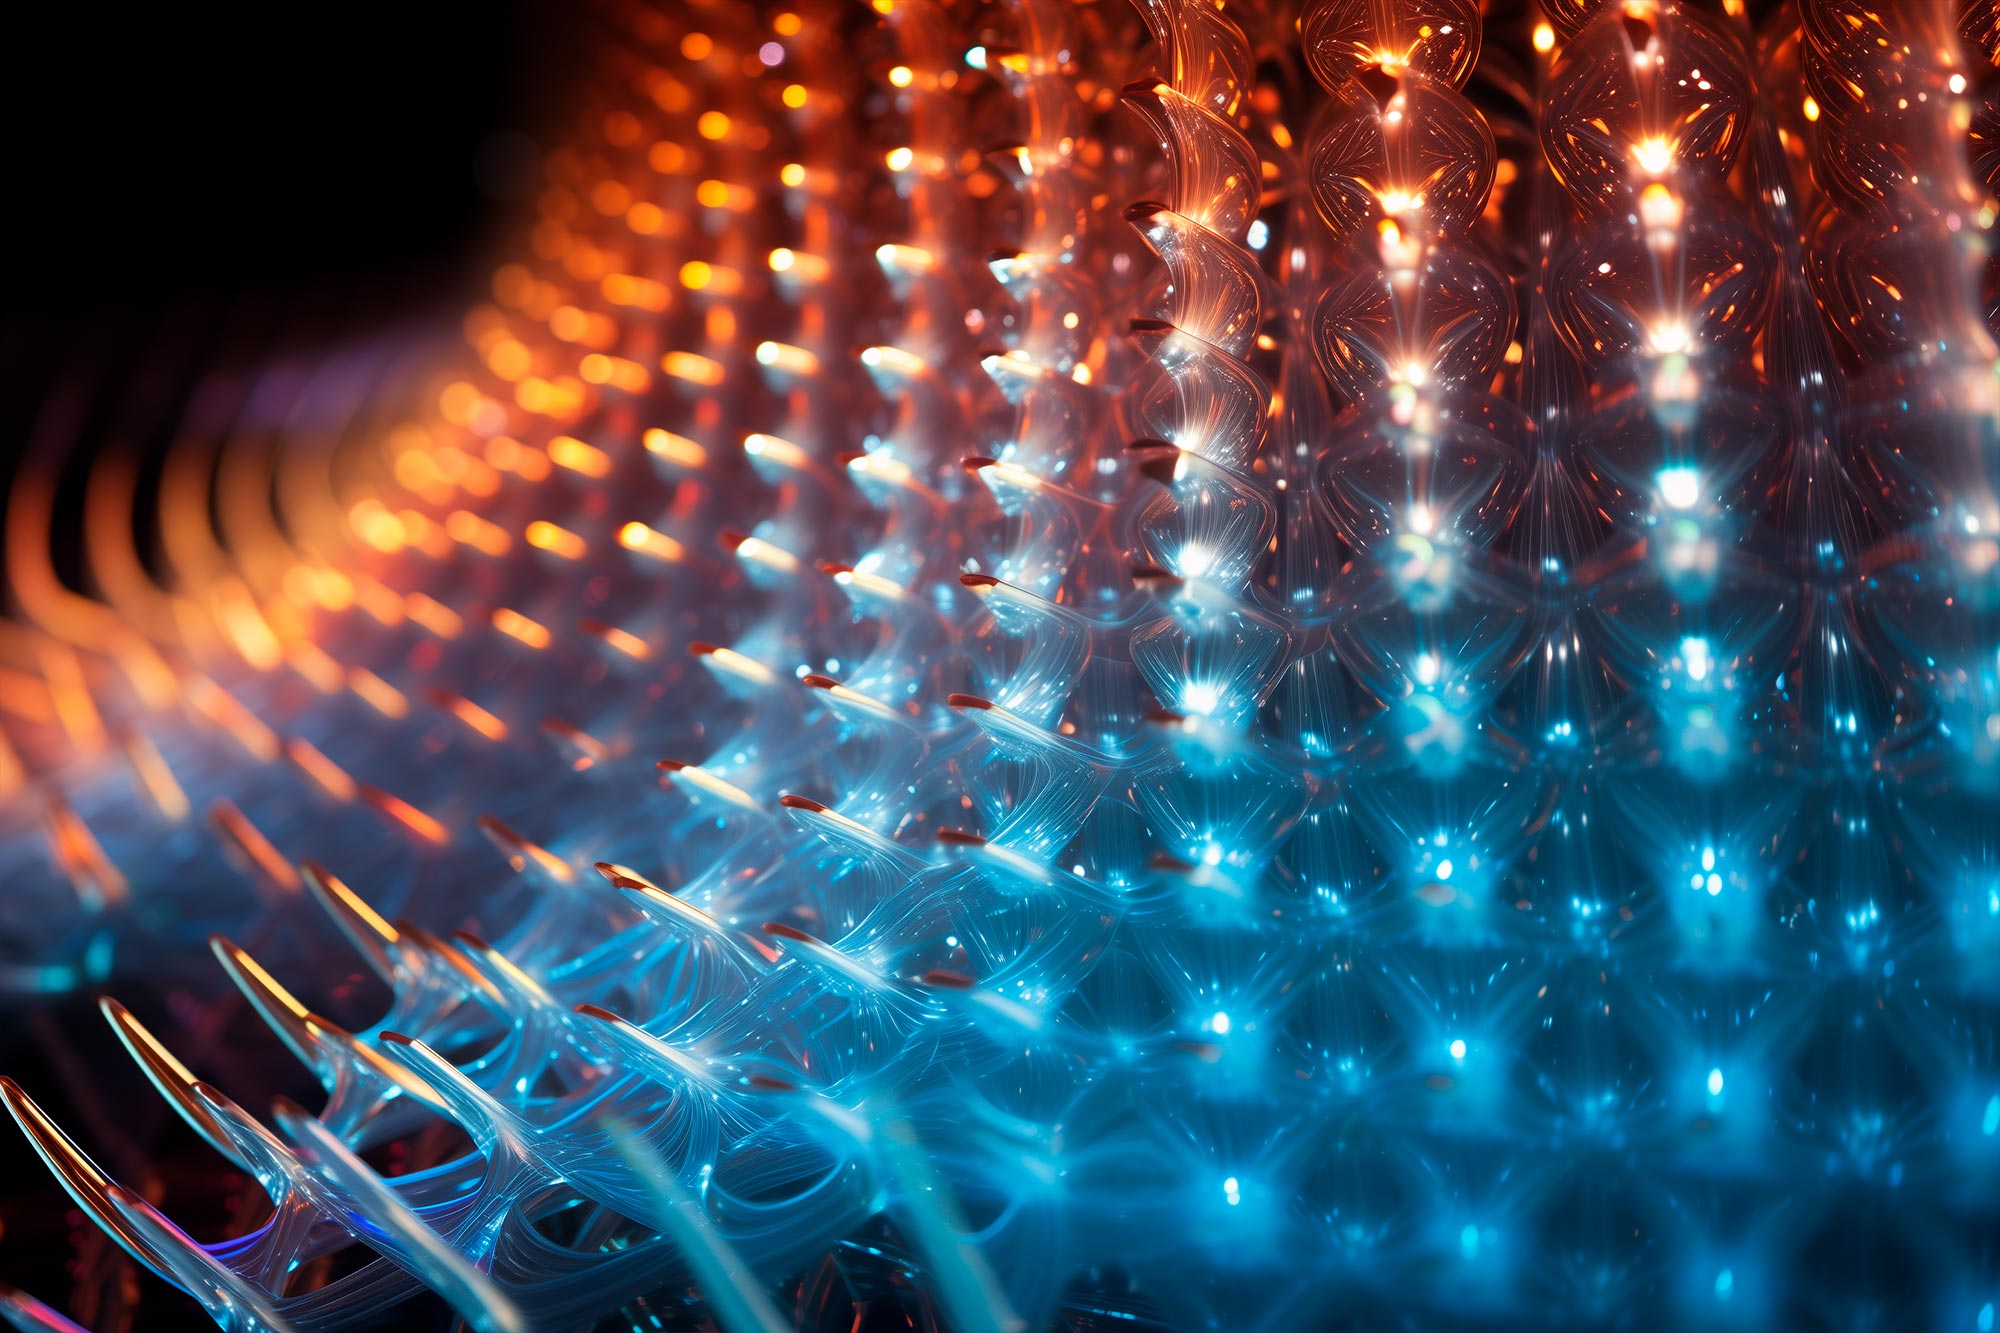 The Utilization of Light by Physicists in Constructing Intricate Structures